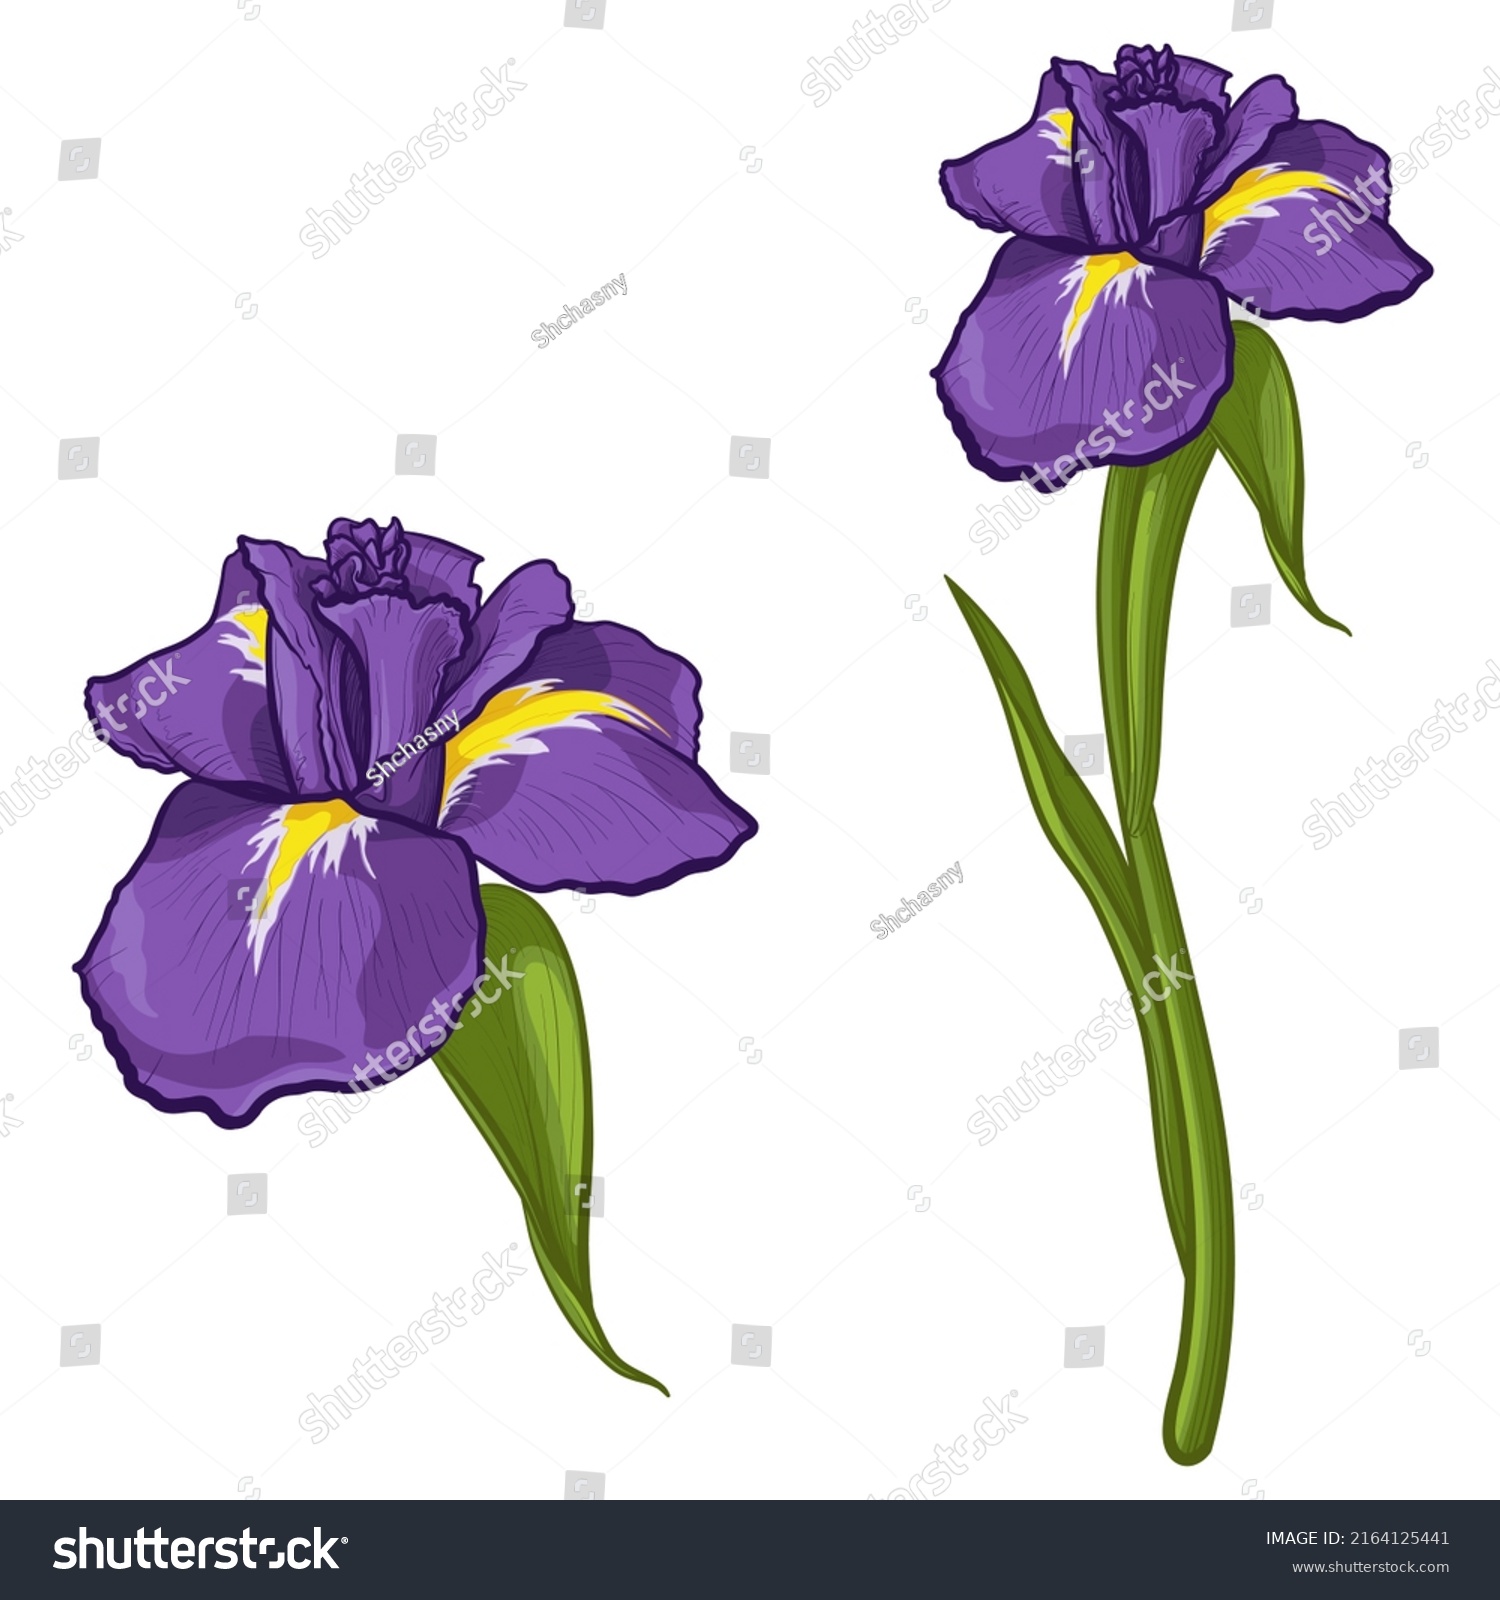 Iris flowers isolated on white background. Colorful vector illustration. #2164125441